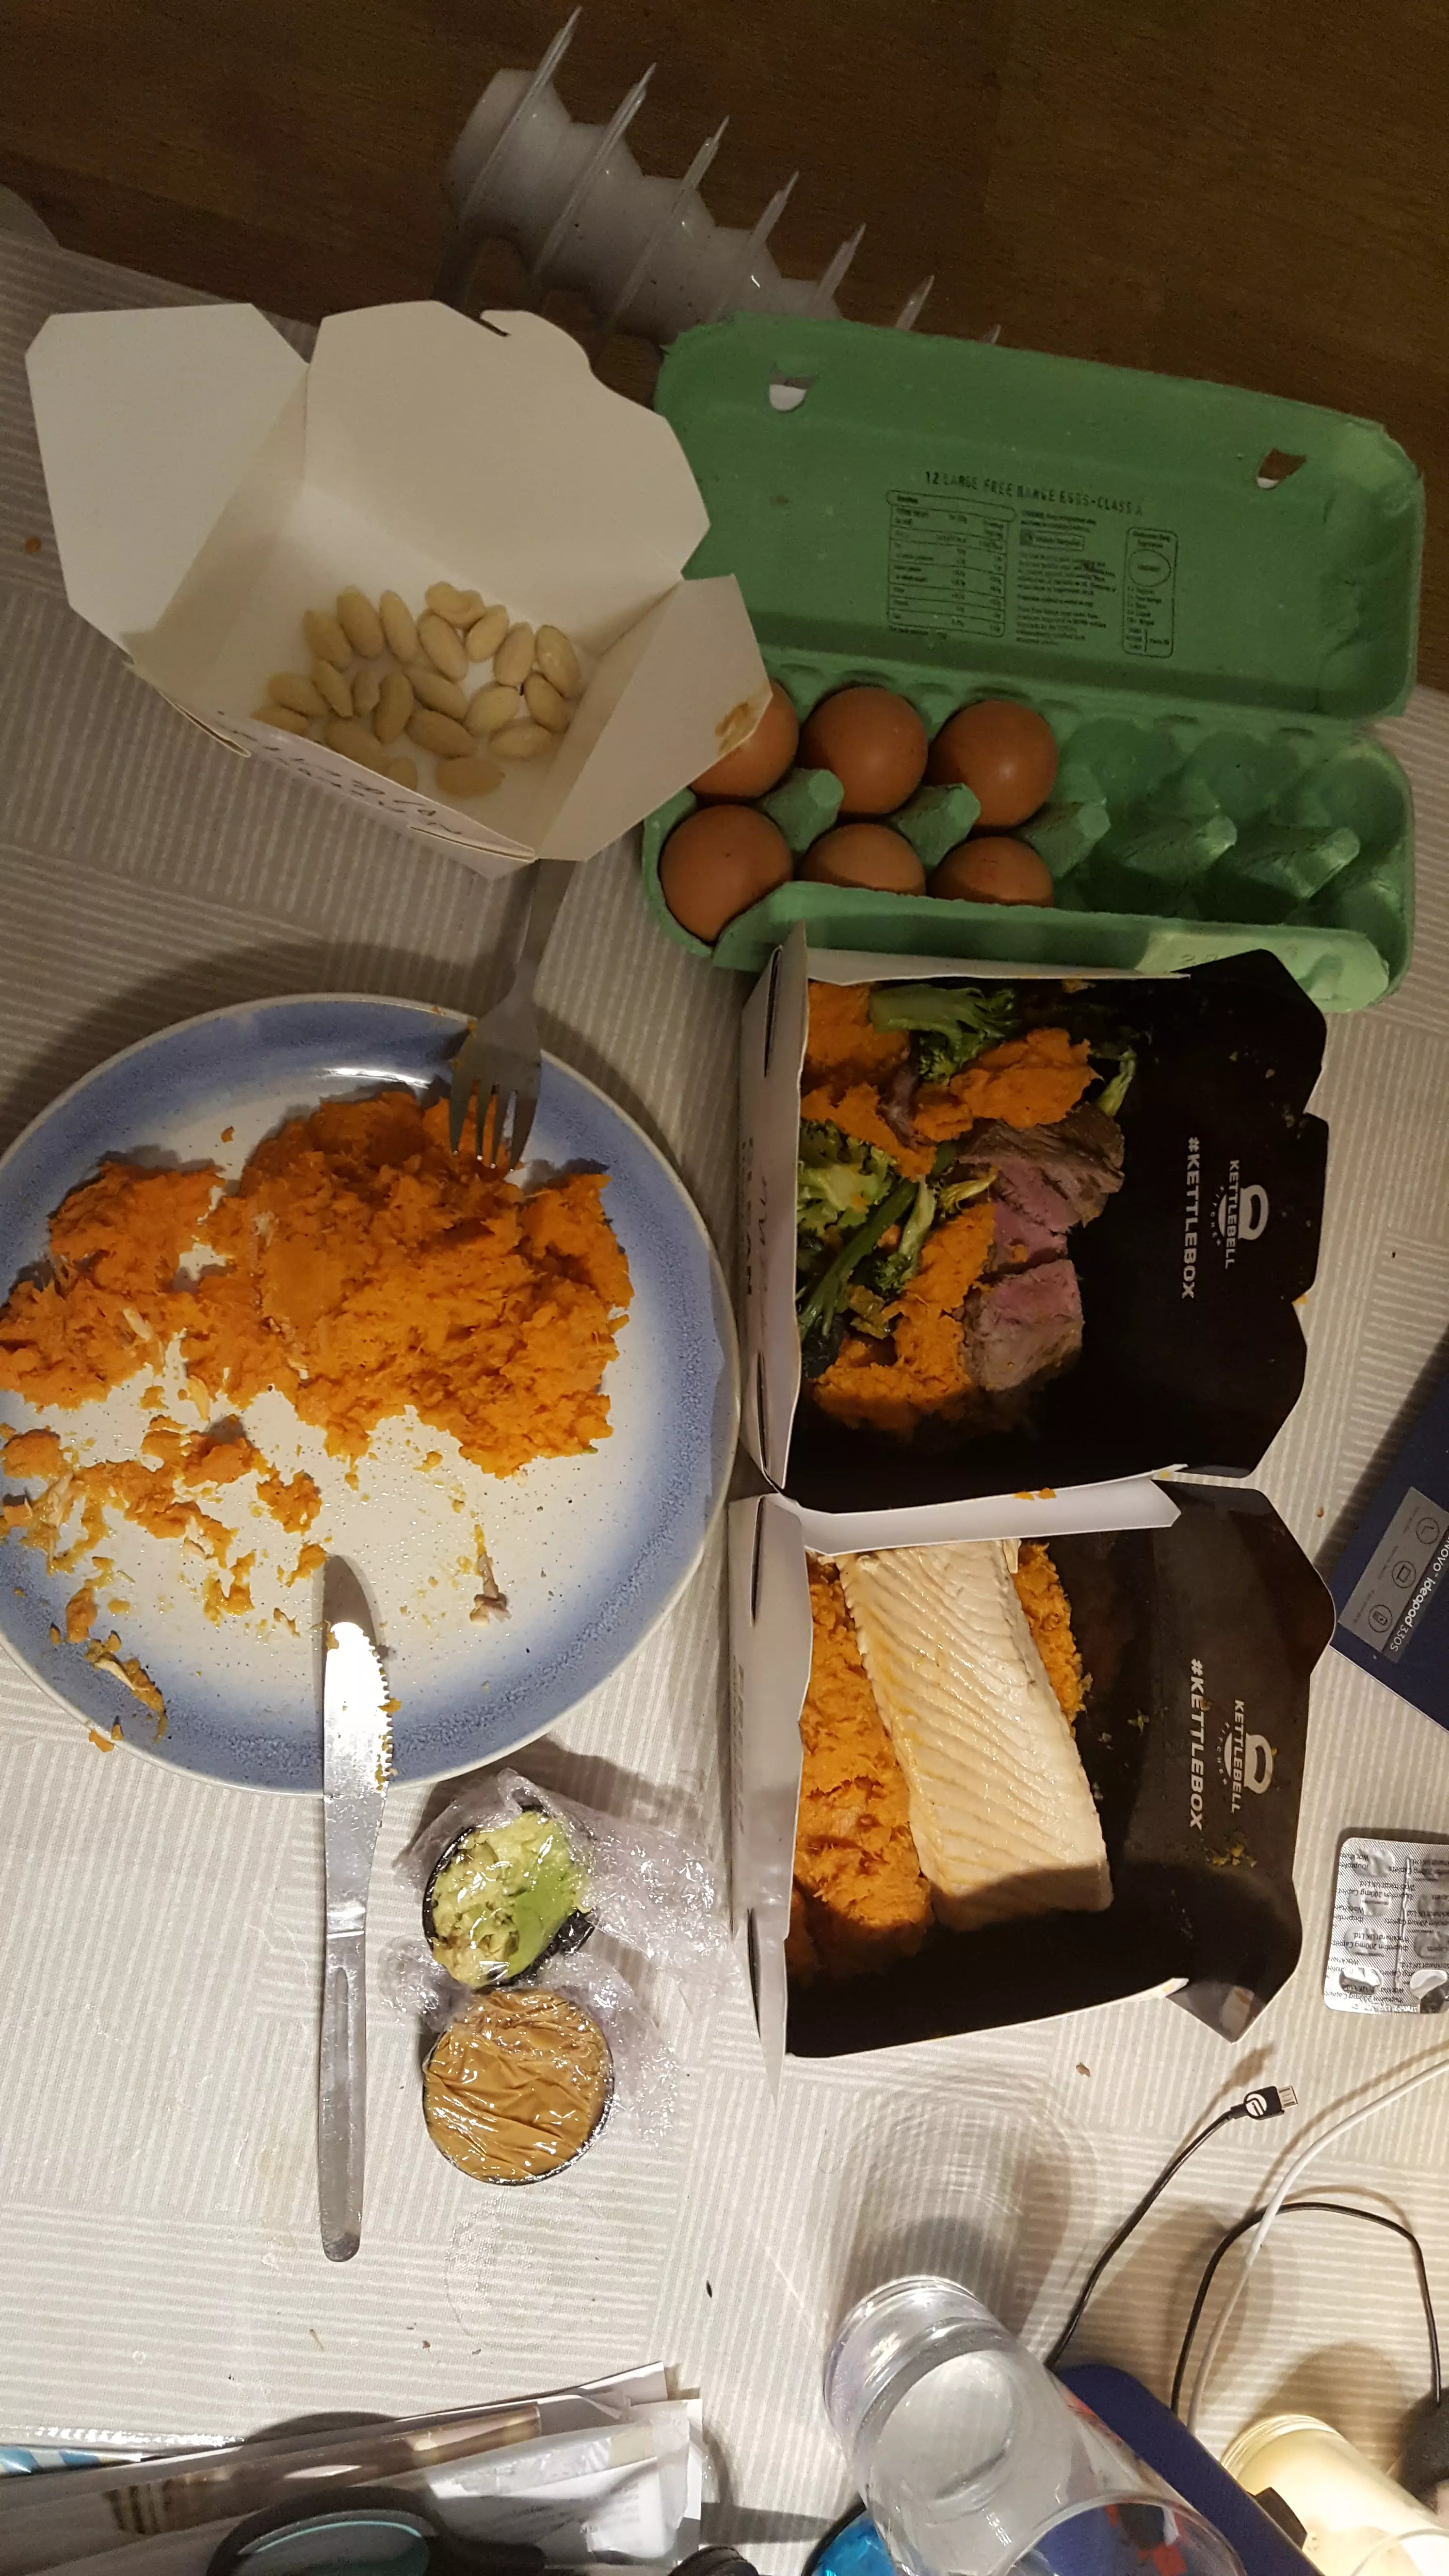 I ate absolutely loads, yet all of this was still left to be eaten at the end of the day.